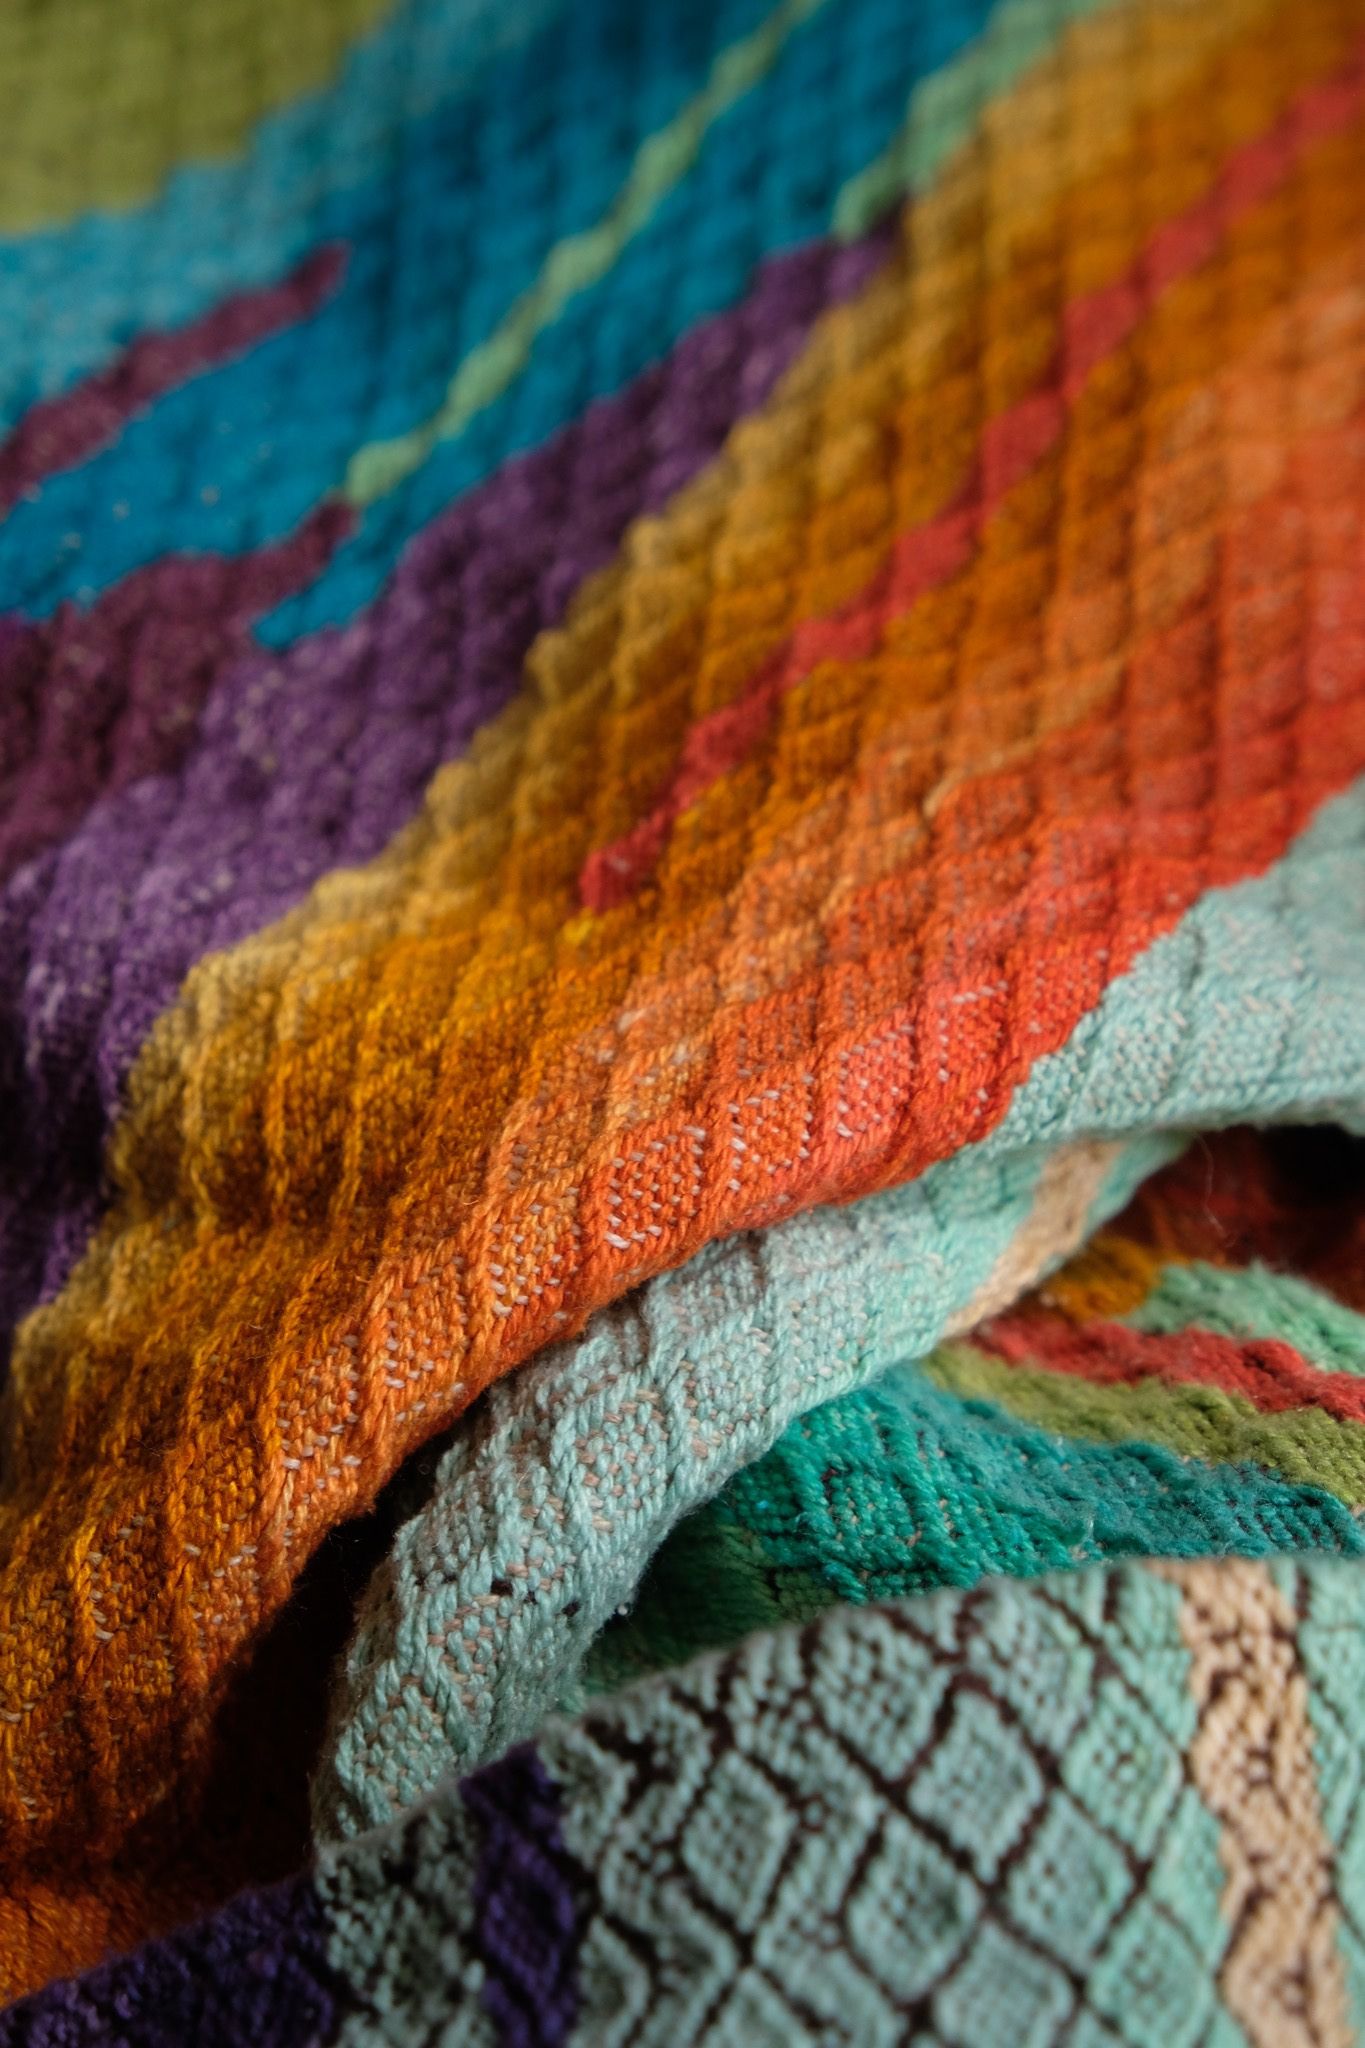 Brightly colored purple, blue, orange, green, black and pink handwoven fabric laying on a wooden floor. 